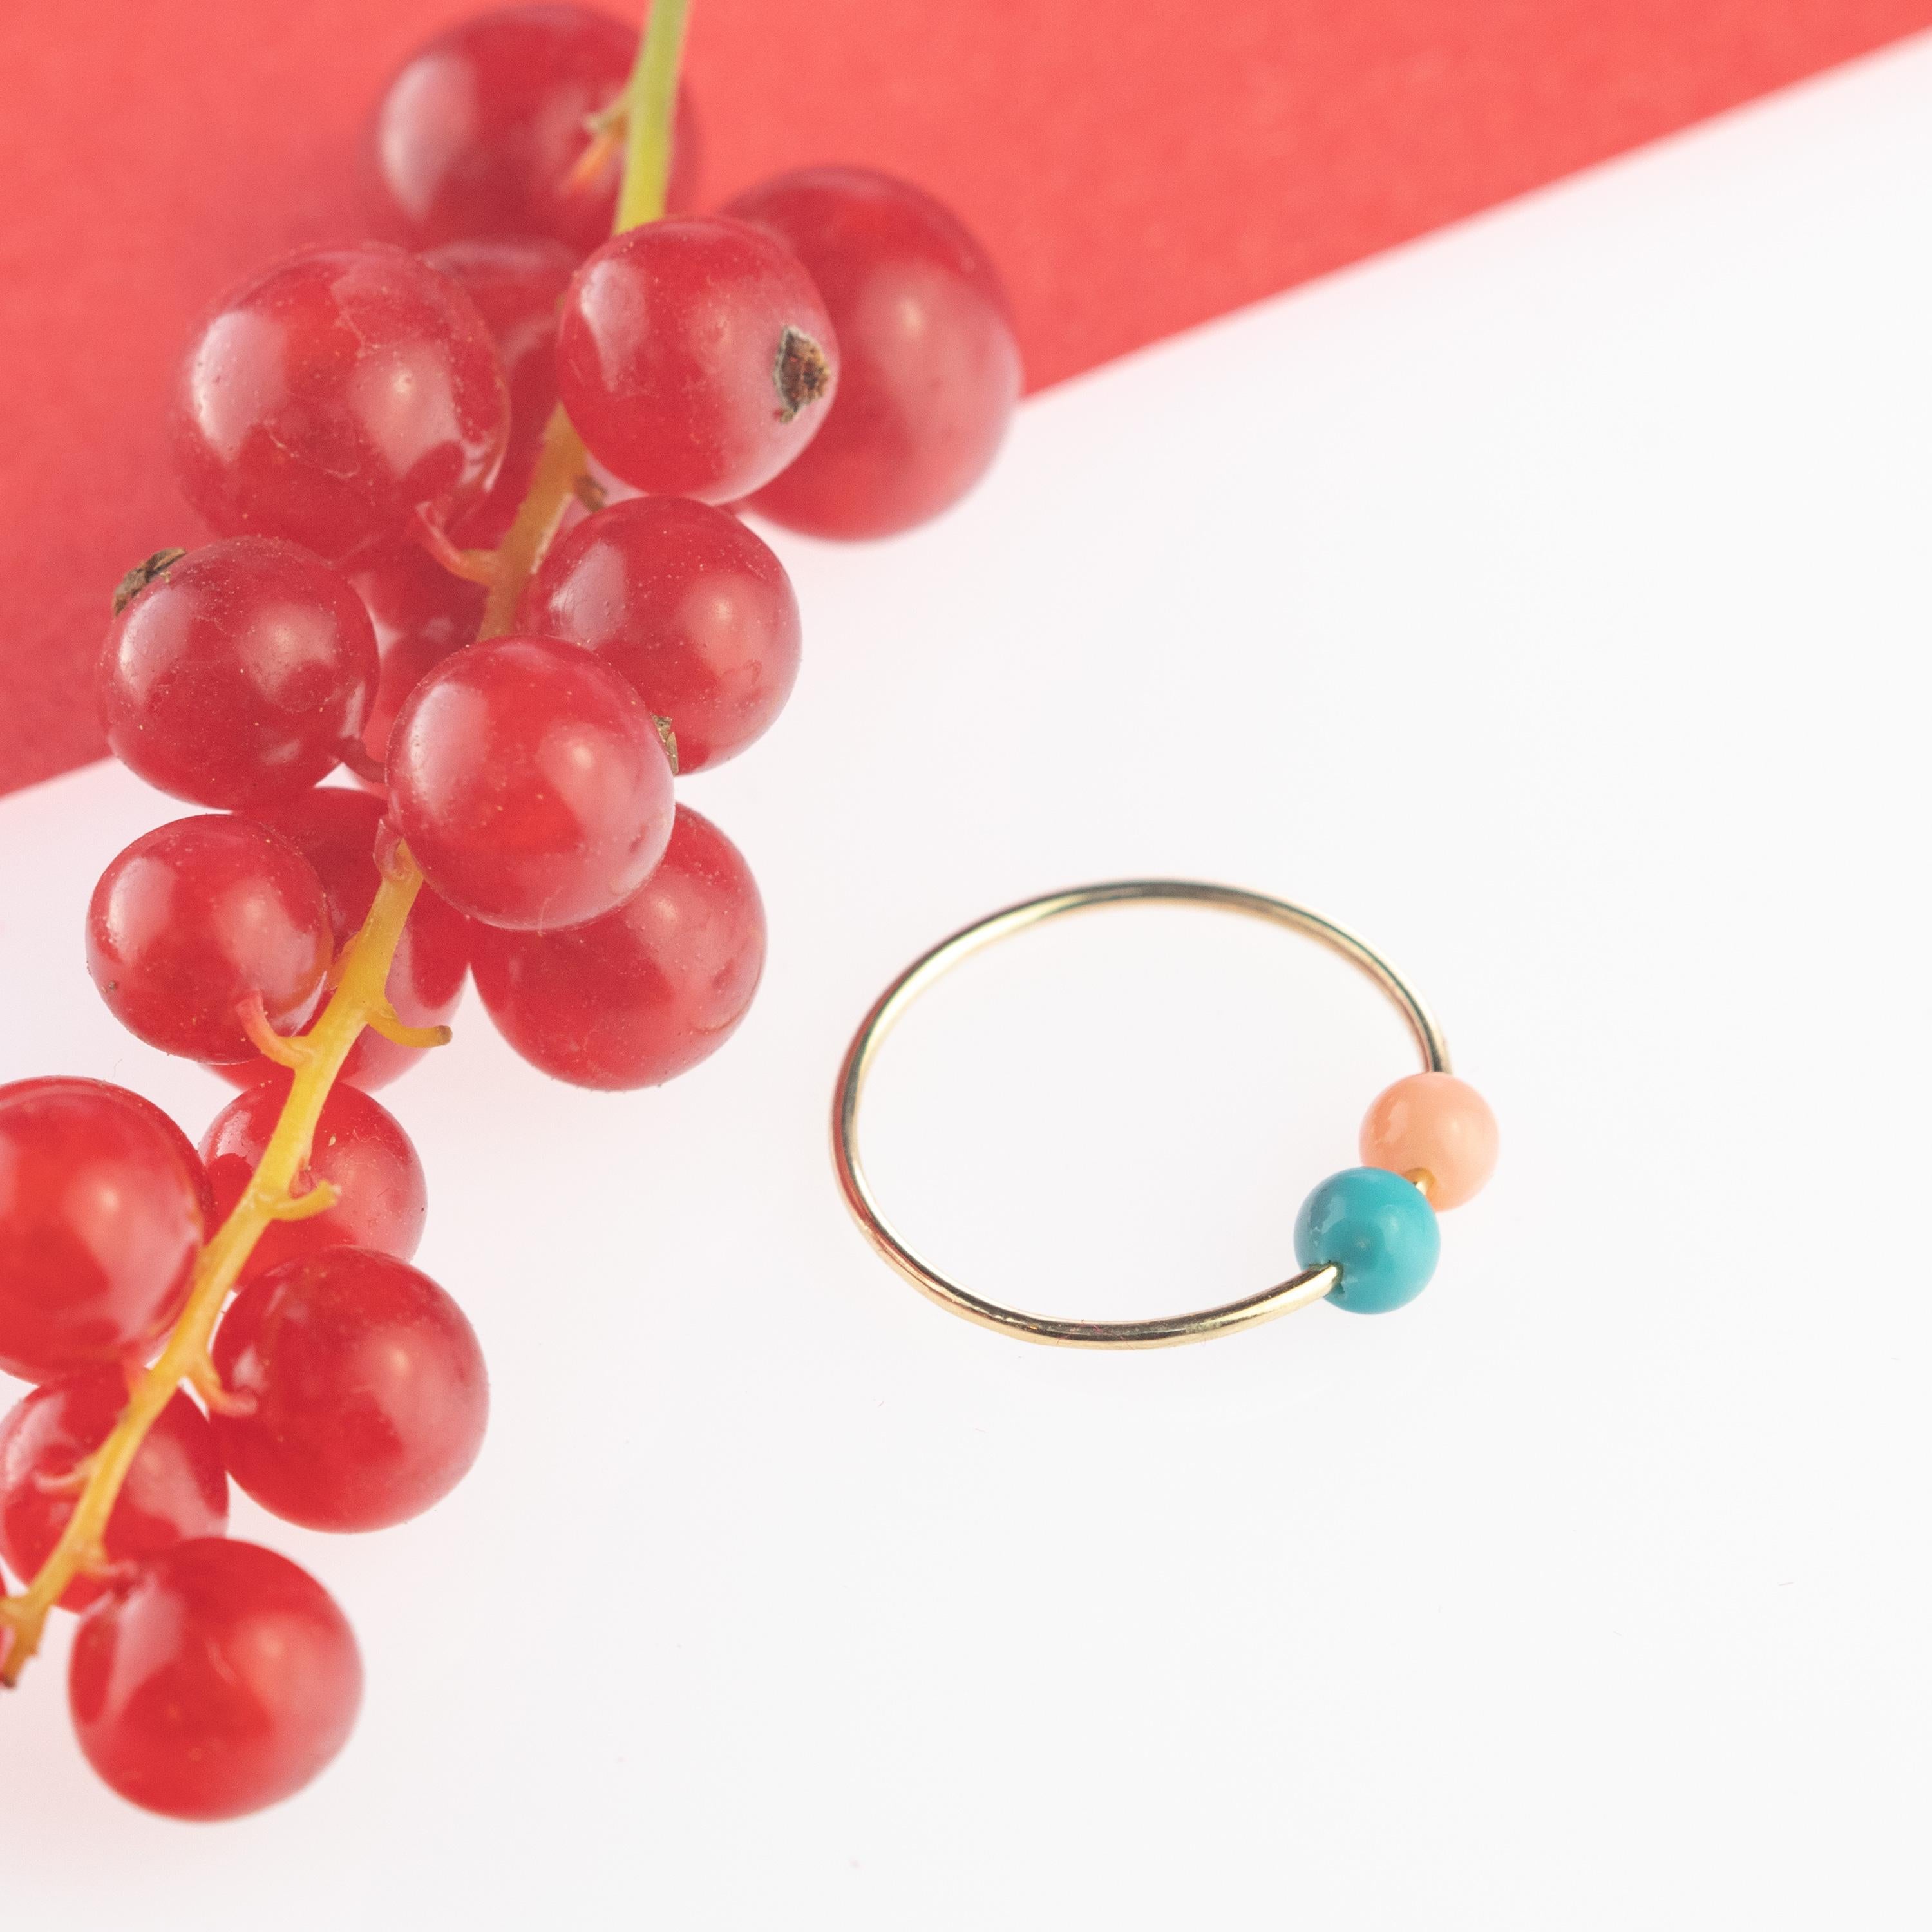 Signature INTINI Jewels Asteroid Planet ring. Contemporary ring design in 9 karat yellow gold with a precious coral and turquoise beads.  Passion and intensity mixed in one jewel. Delight yourself with a strong, minimalist design, just for a